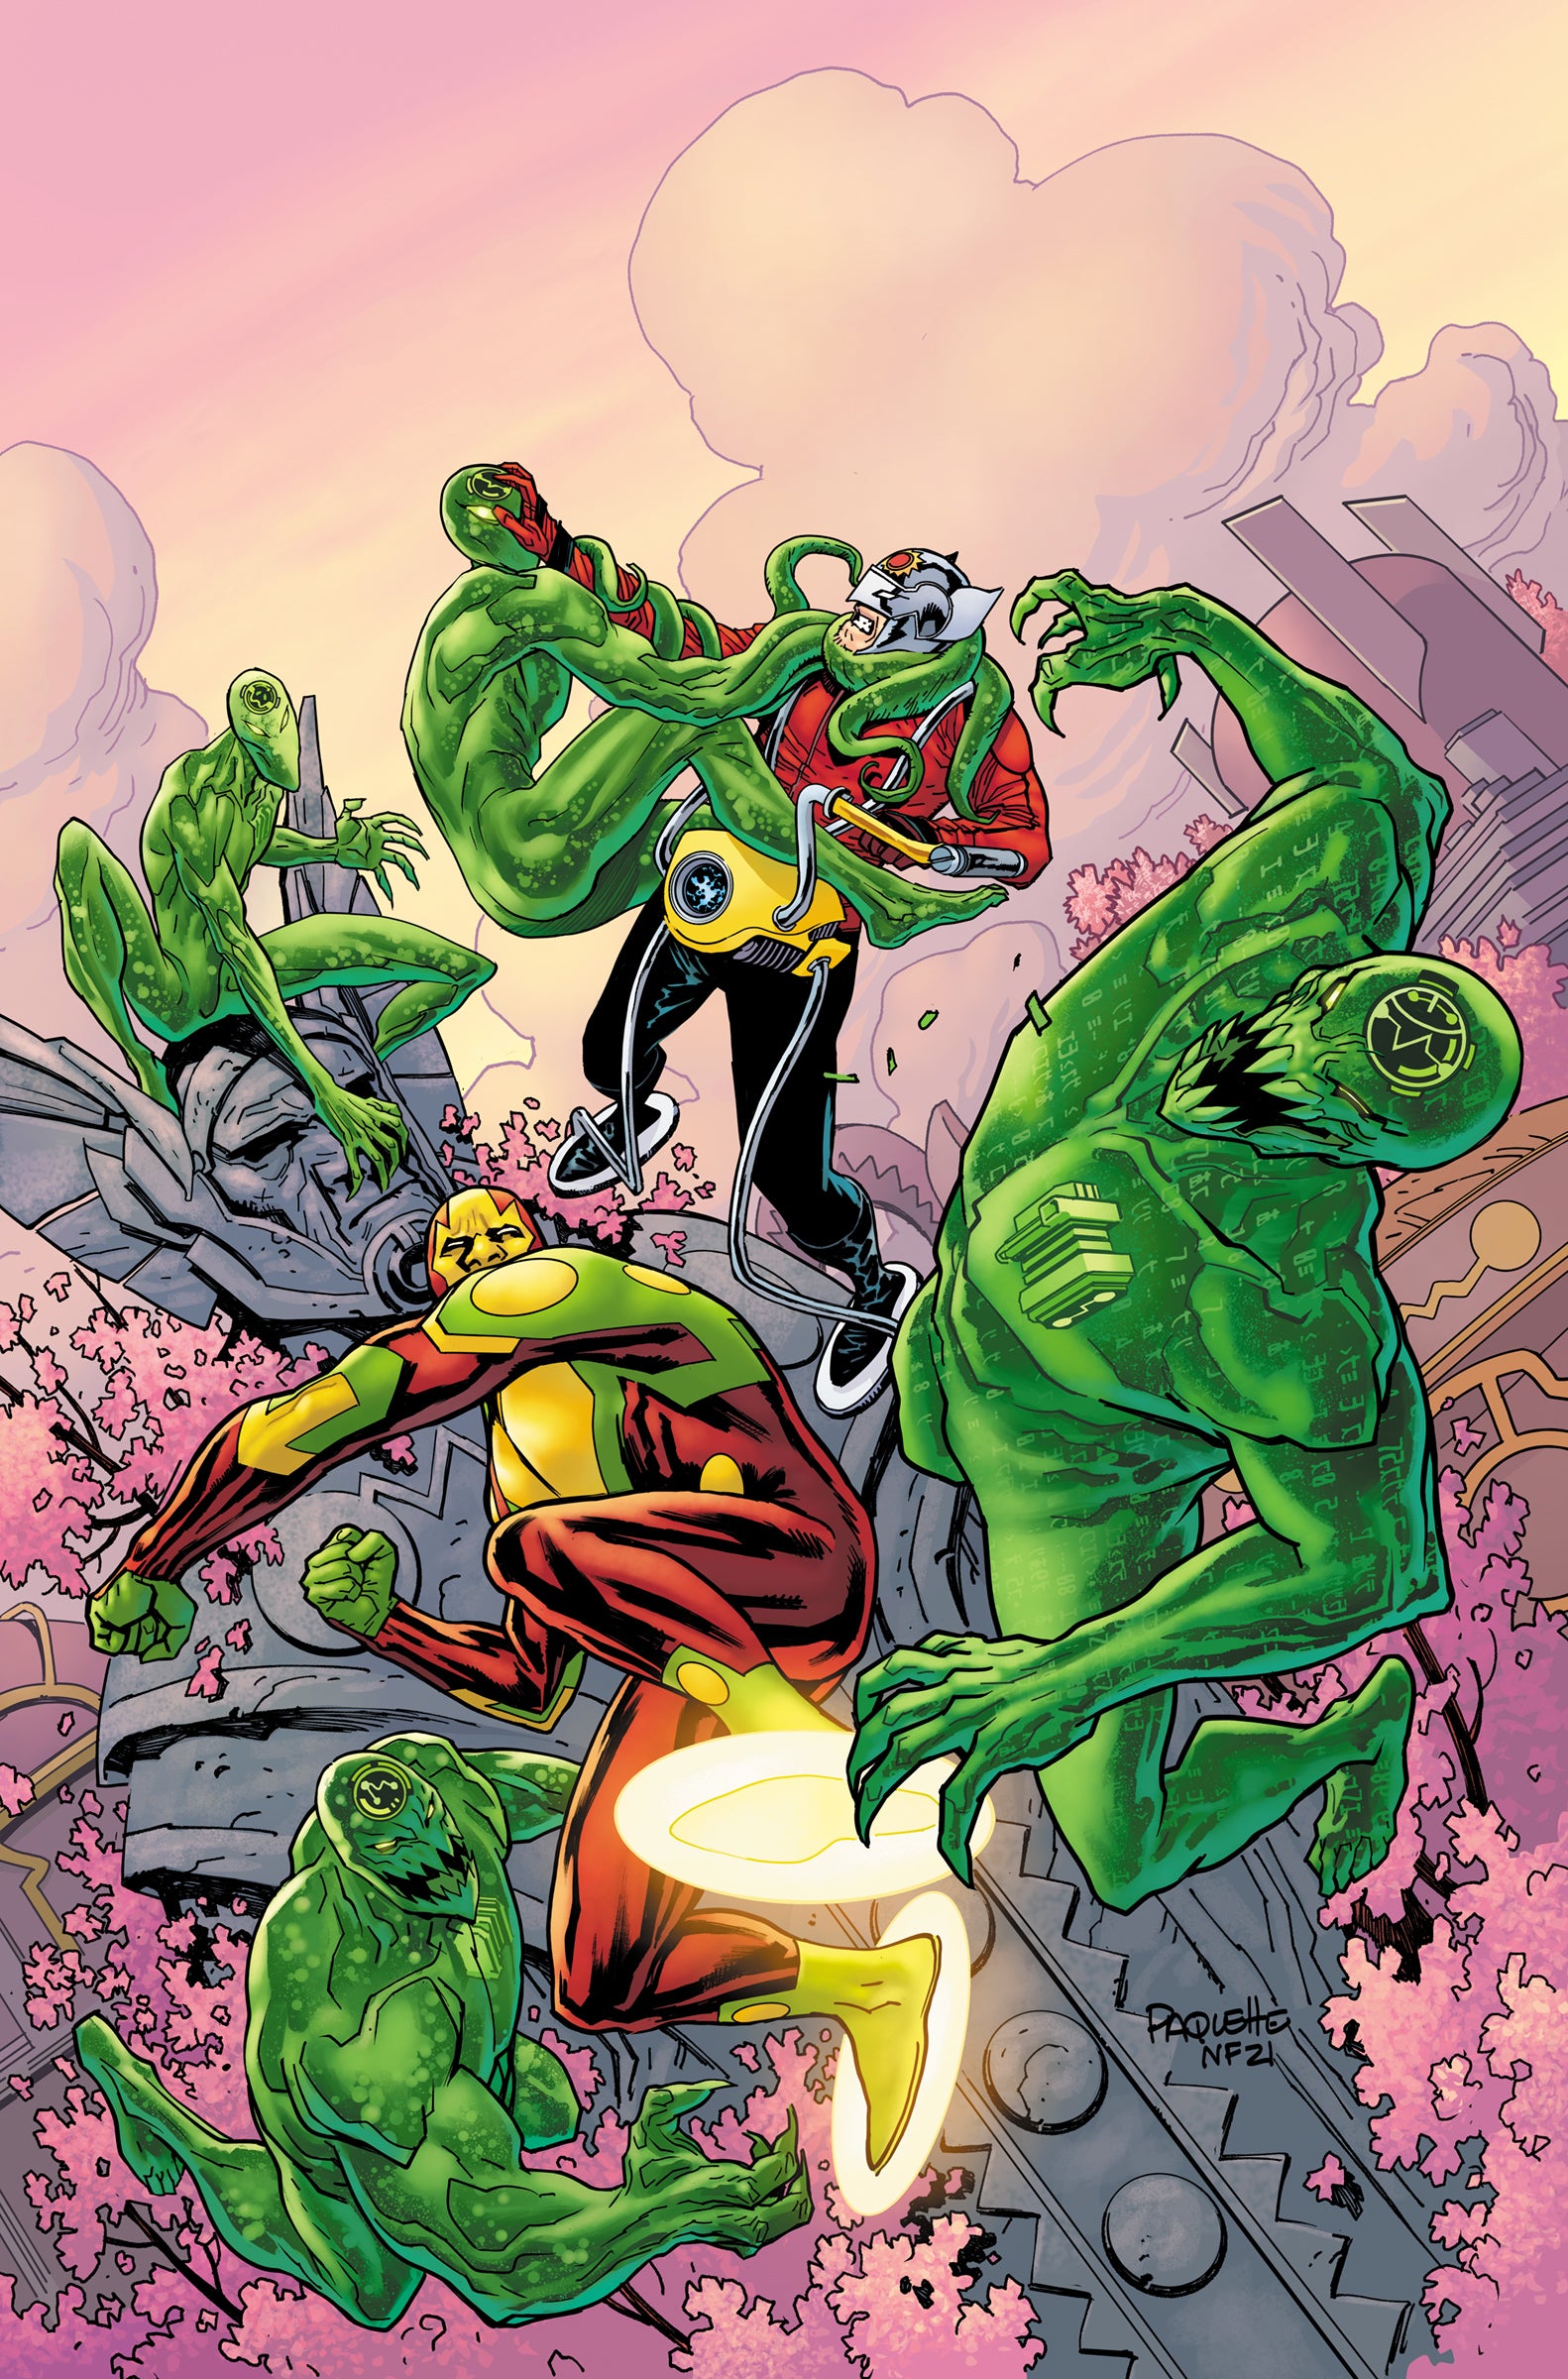 MISTER MIRACLE THE SOURCE OF FREEDOM #5 (OF 6) CVR A YANICK PAQUETTE